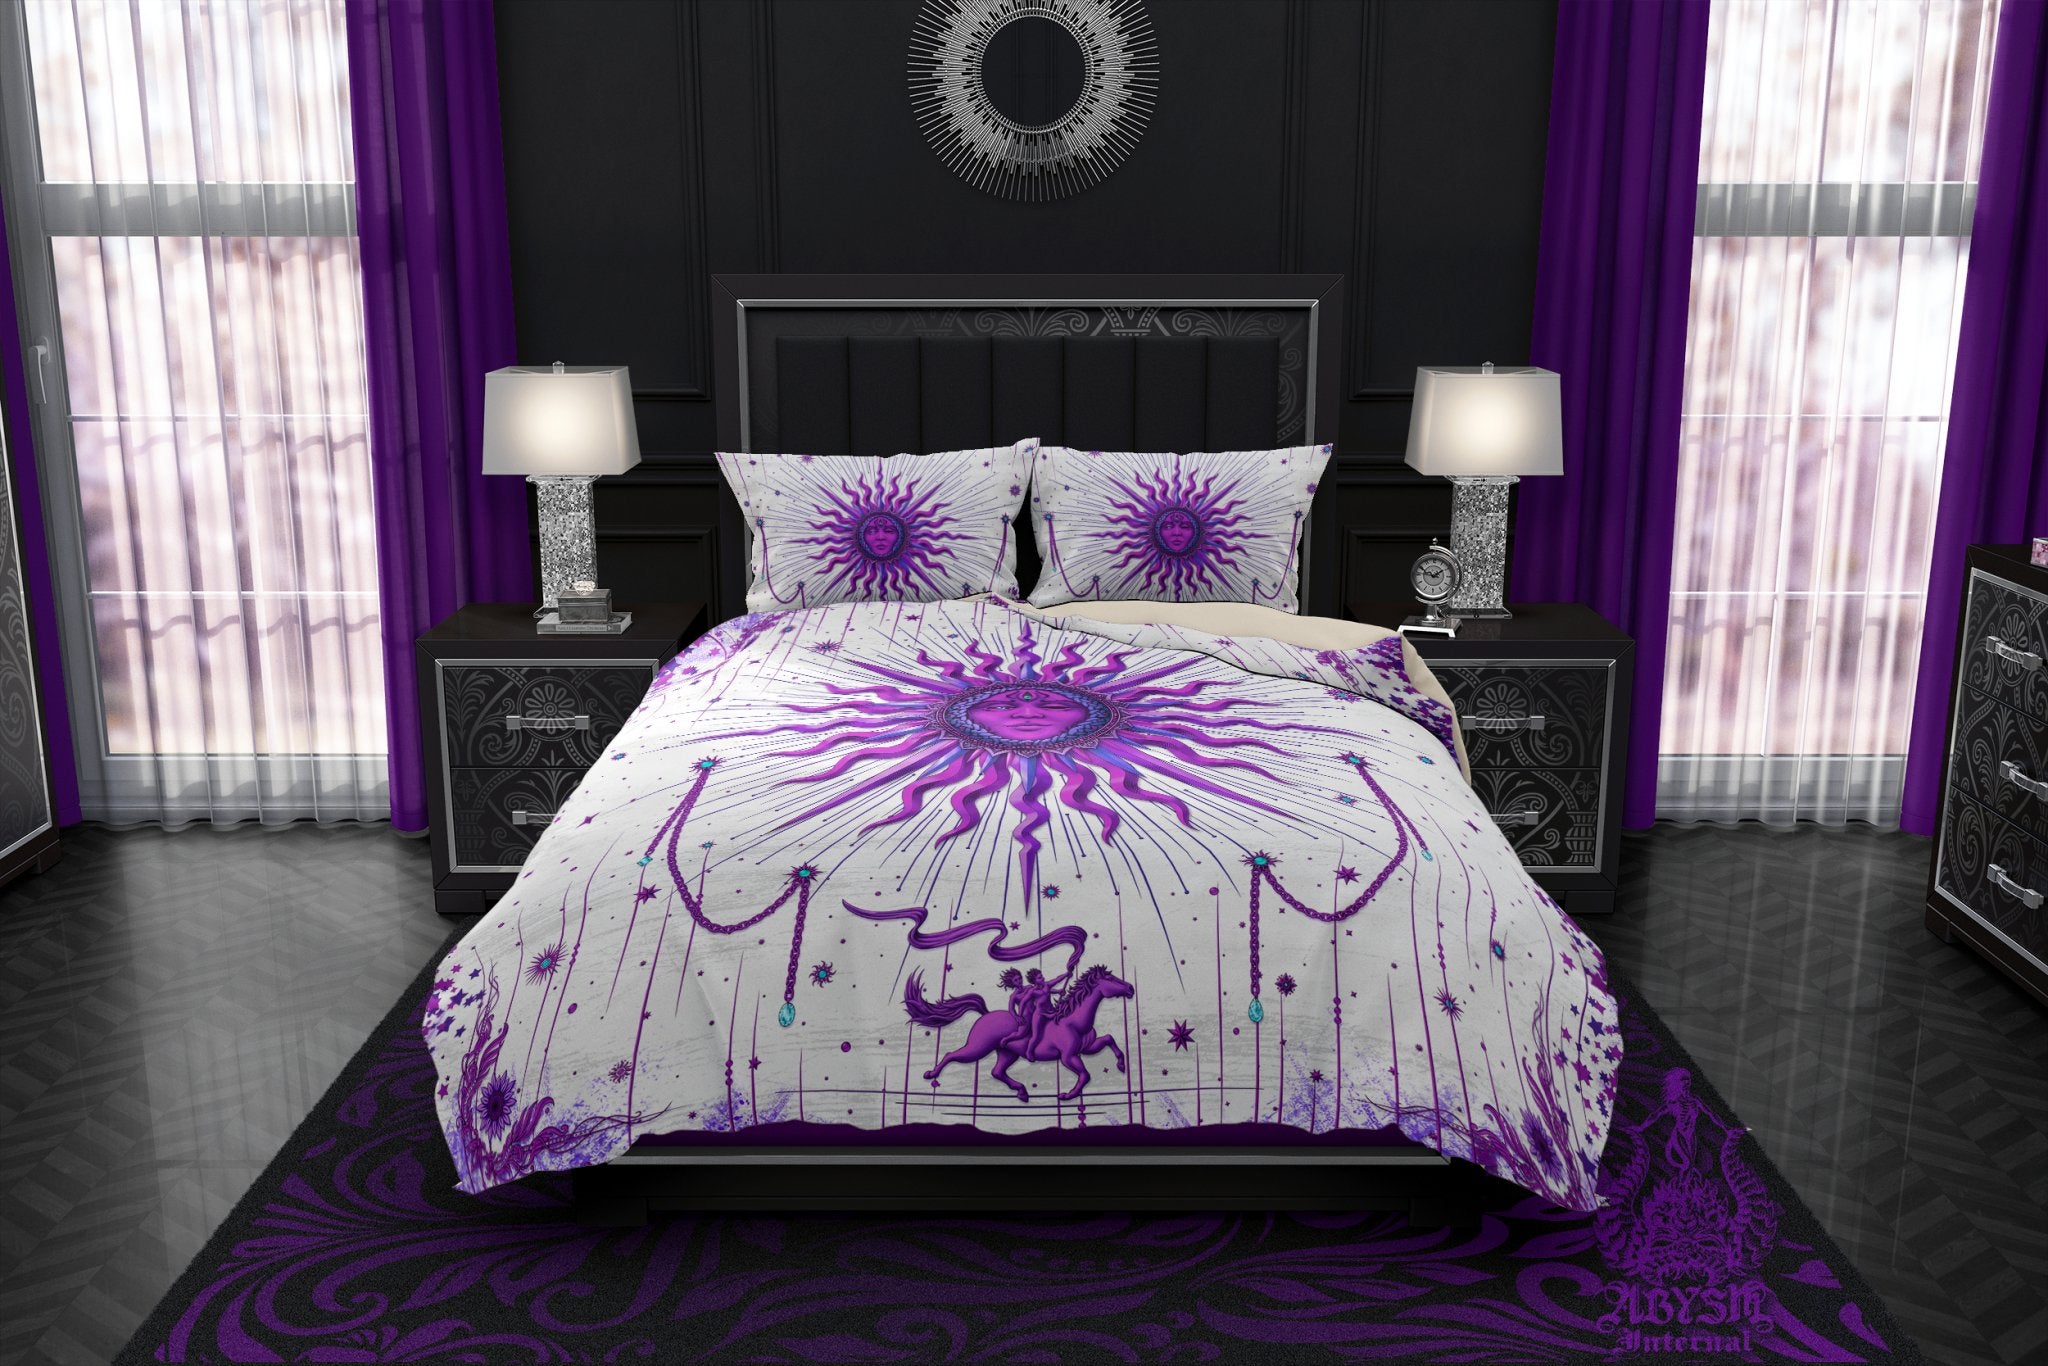 White Goth Sun Duvet Cover, Bed Covering, Witchy Comforter, Purple Bedroom Decor King, Queen & Twin Bedding Set - Tarot Arcana Art - Abysm Internal